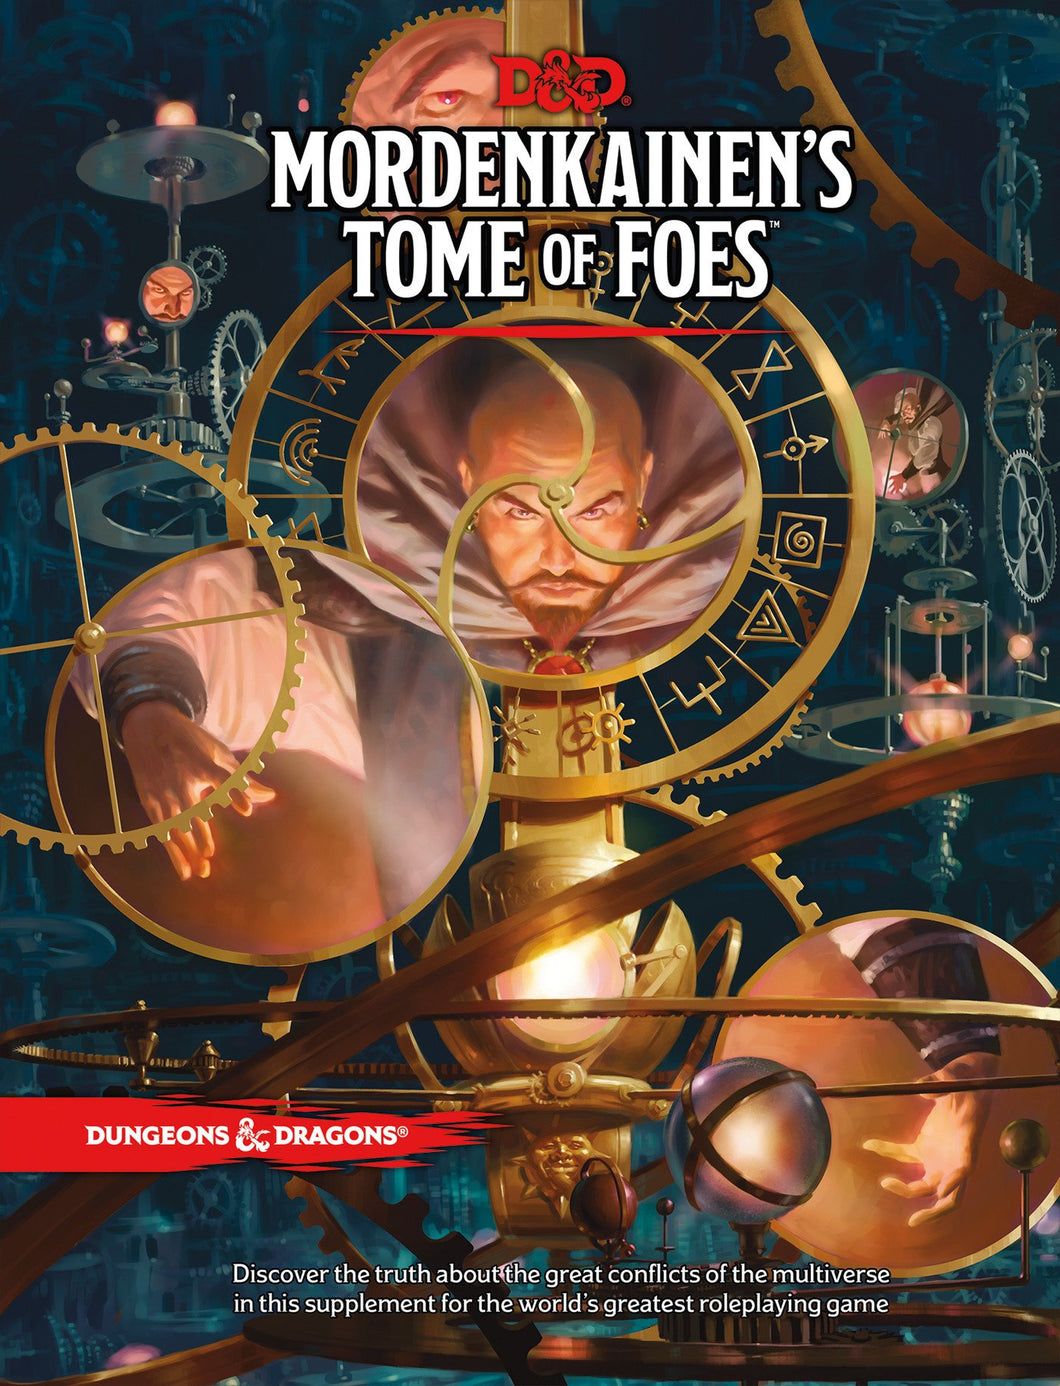 DUNGEONS AND DRAGONS 5E: MORDENKAINEN'S TOME OF FOES